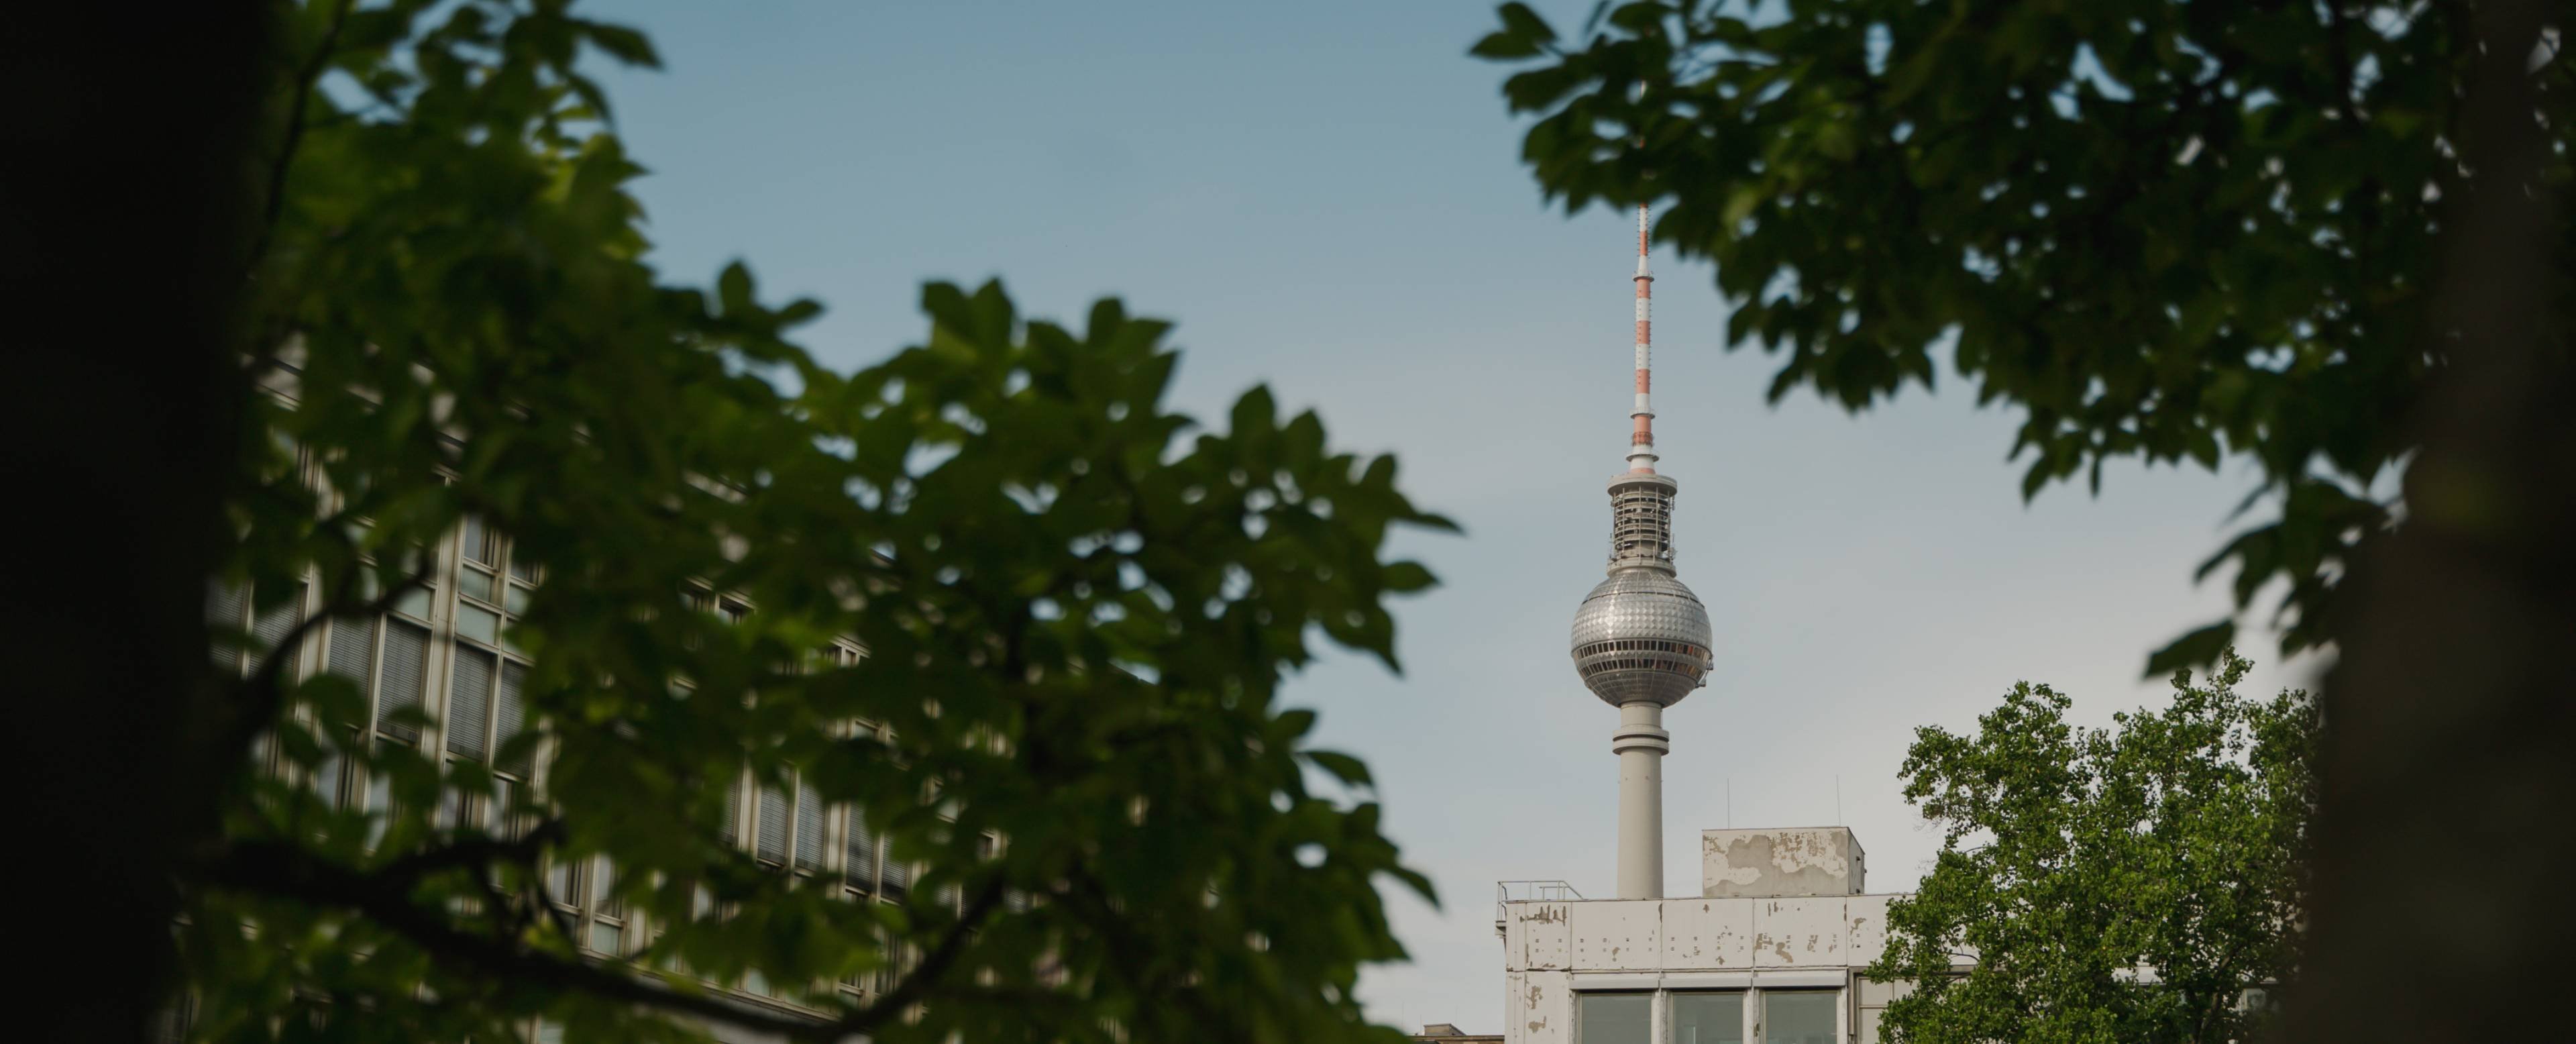 Alumni Advanced Learning Hero Image featuring picture of Berlin TV tower